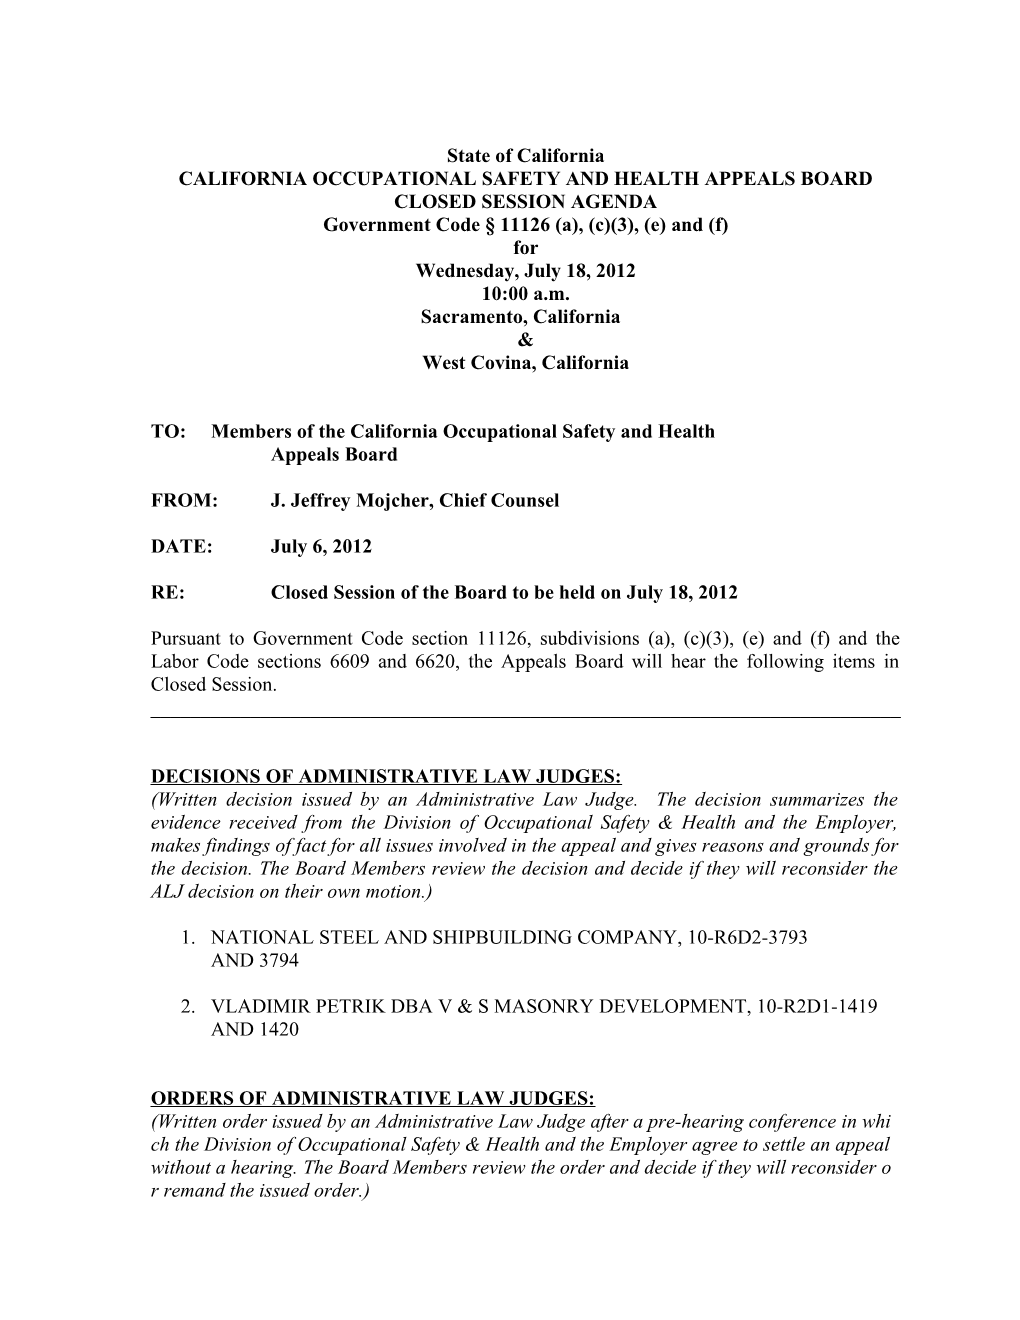 California Occupational Safety & Health Appeals Board s9